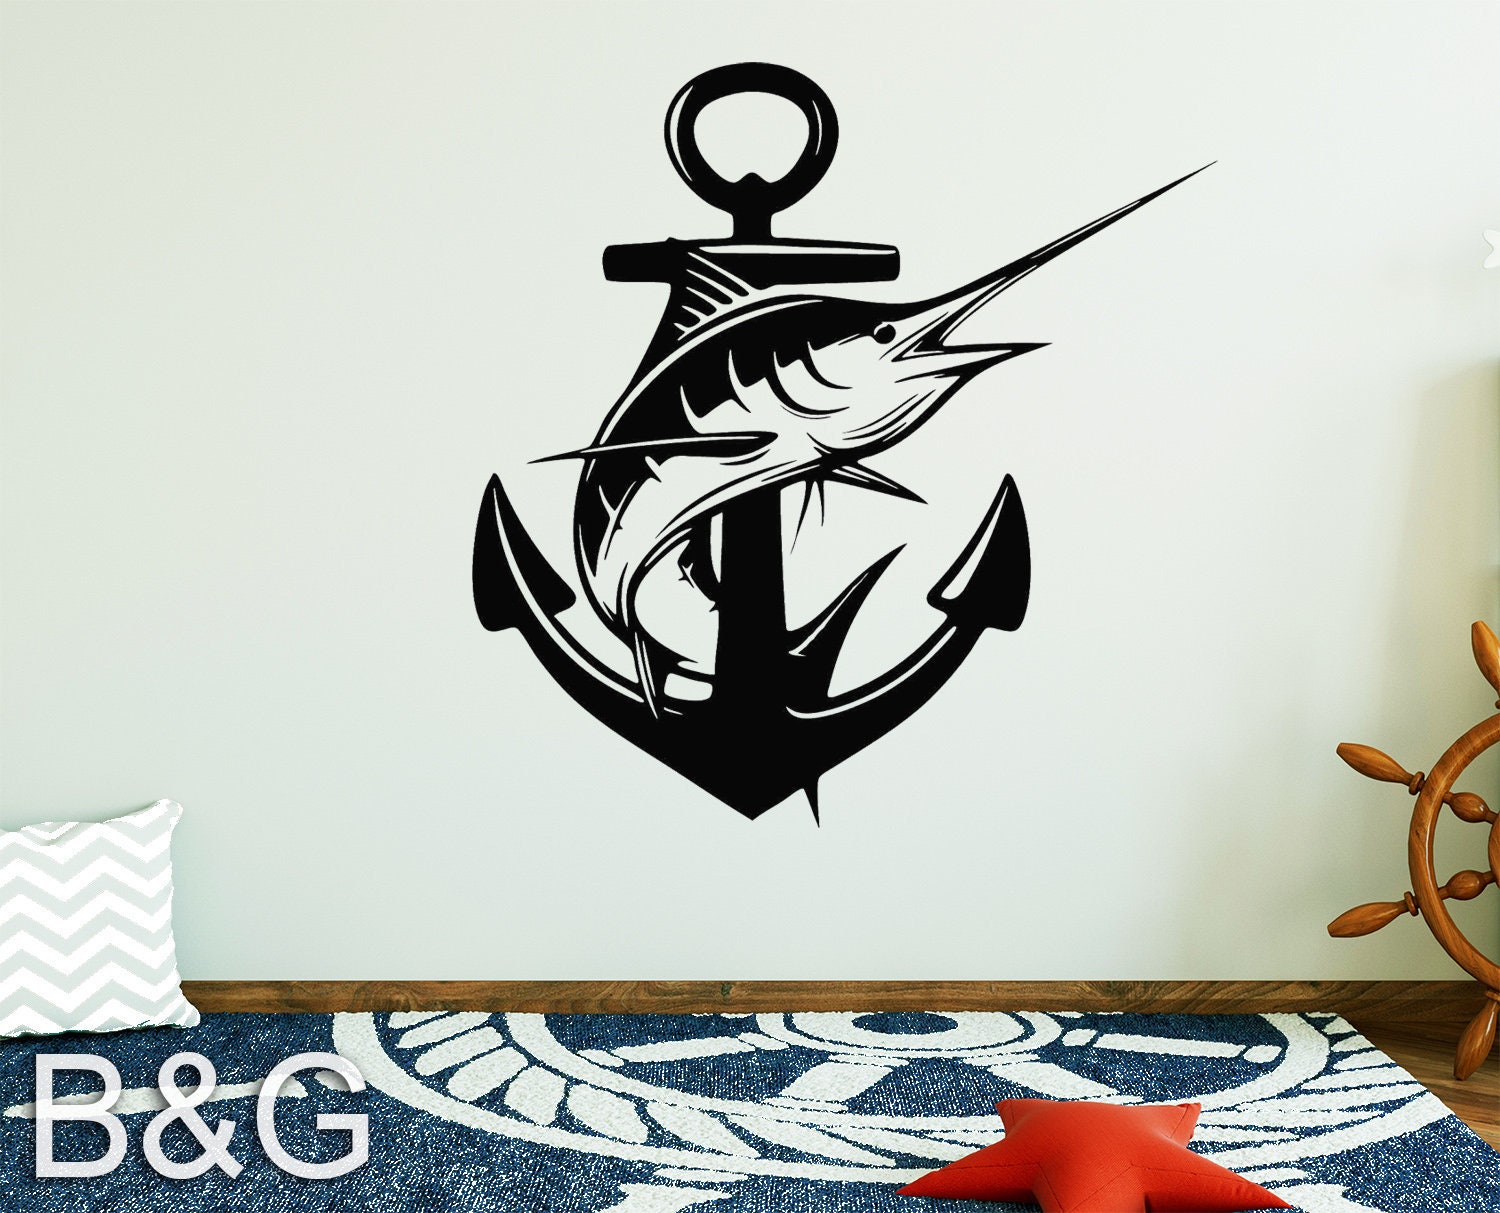 Personalized Boat Name Stickers for Ship Body Decal Styling Engine Hood  Decor Marlin Fishing Sticker Decoration Yacht Mural Z507